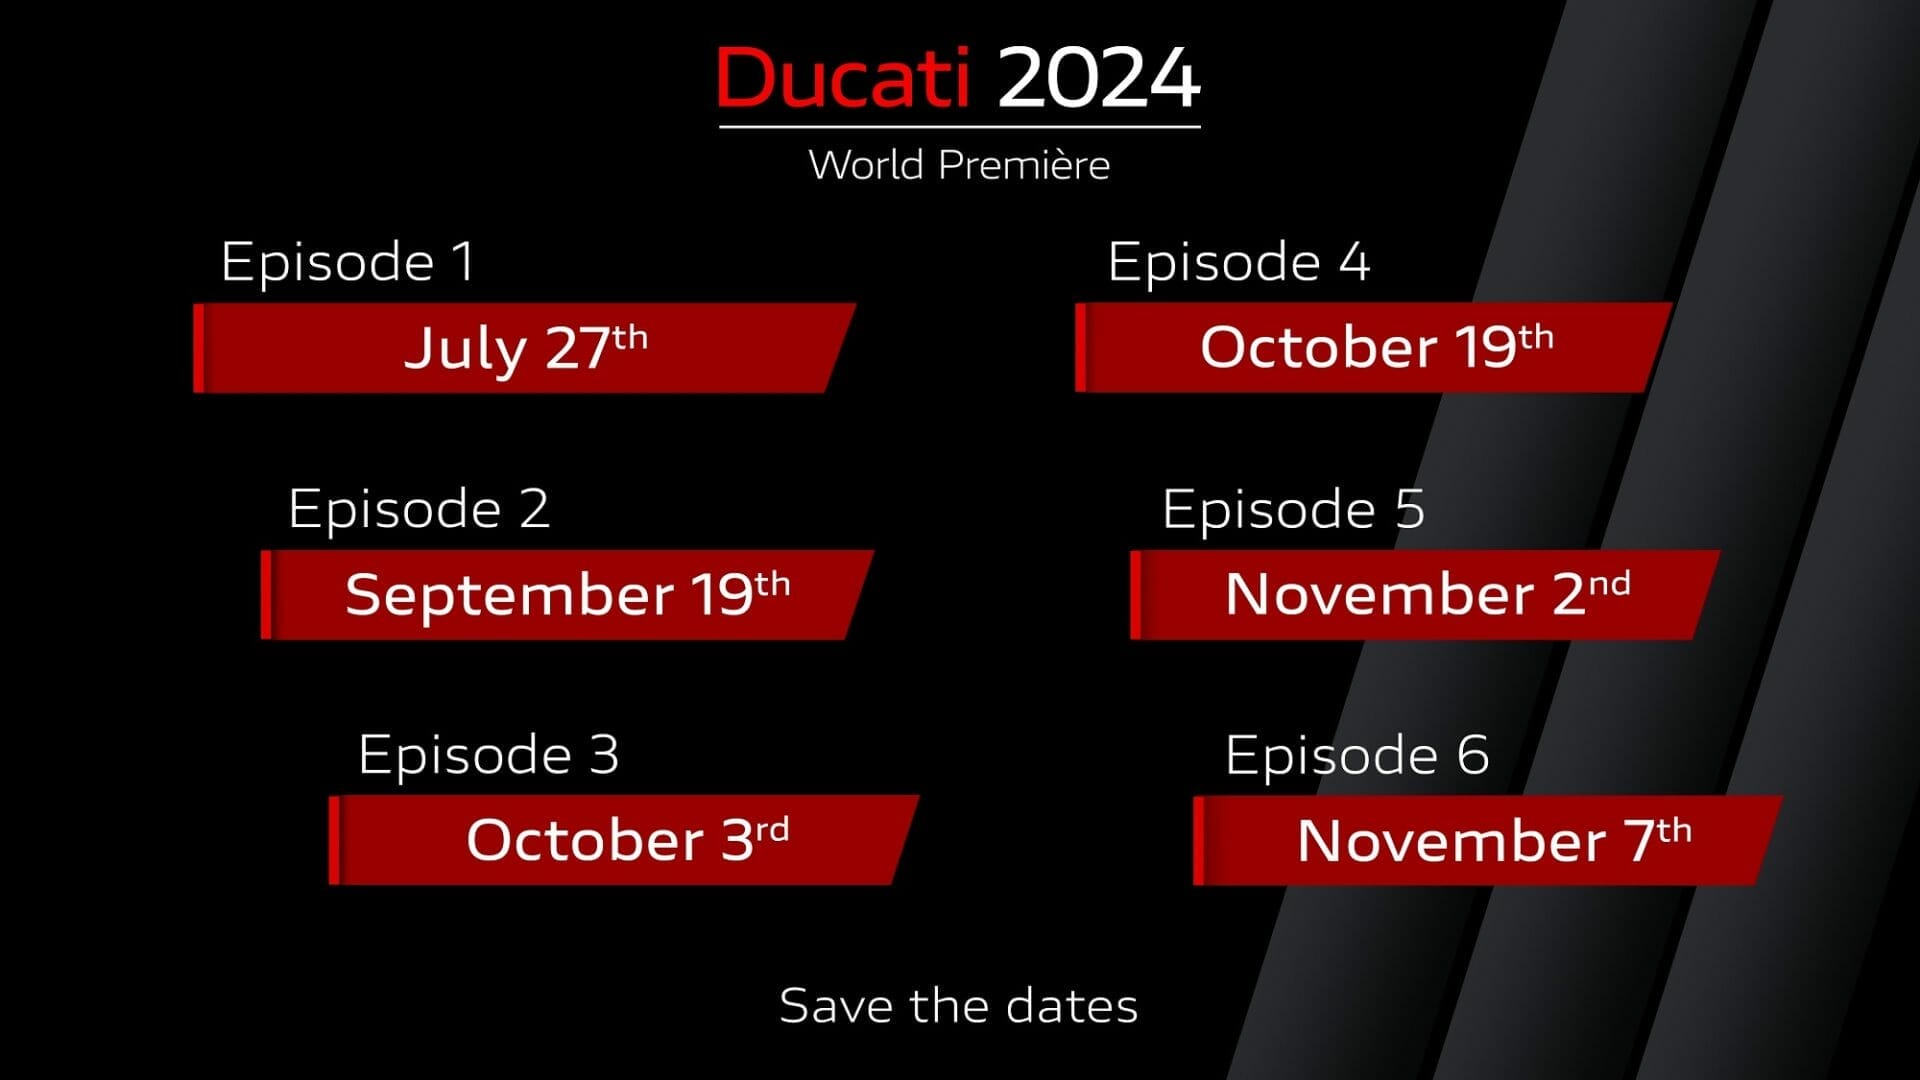 Ducati World Première: Ducati’s 2024 motorcycle launches in six acts